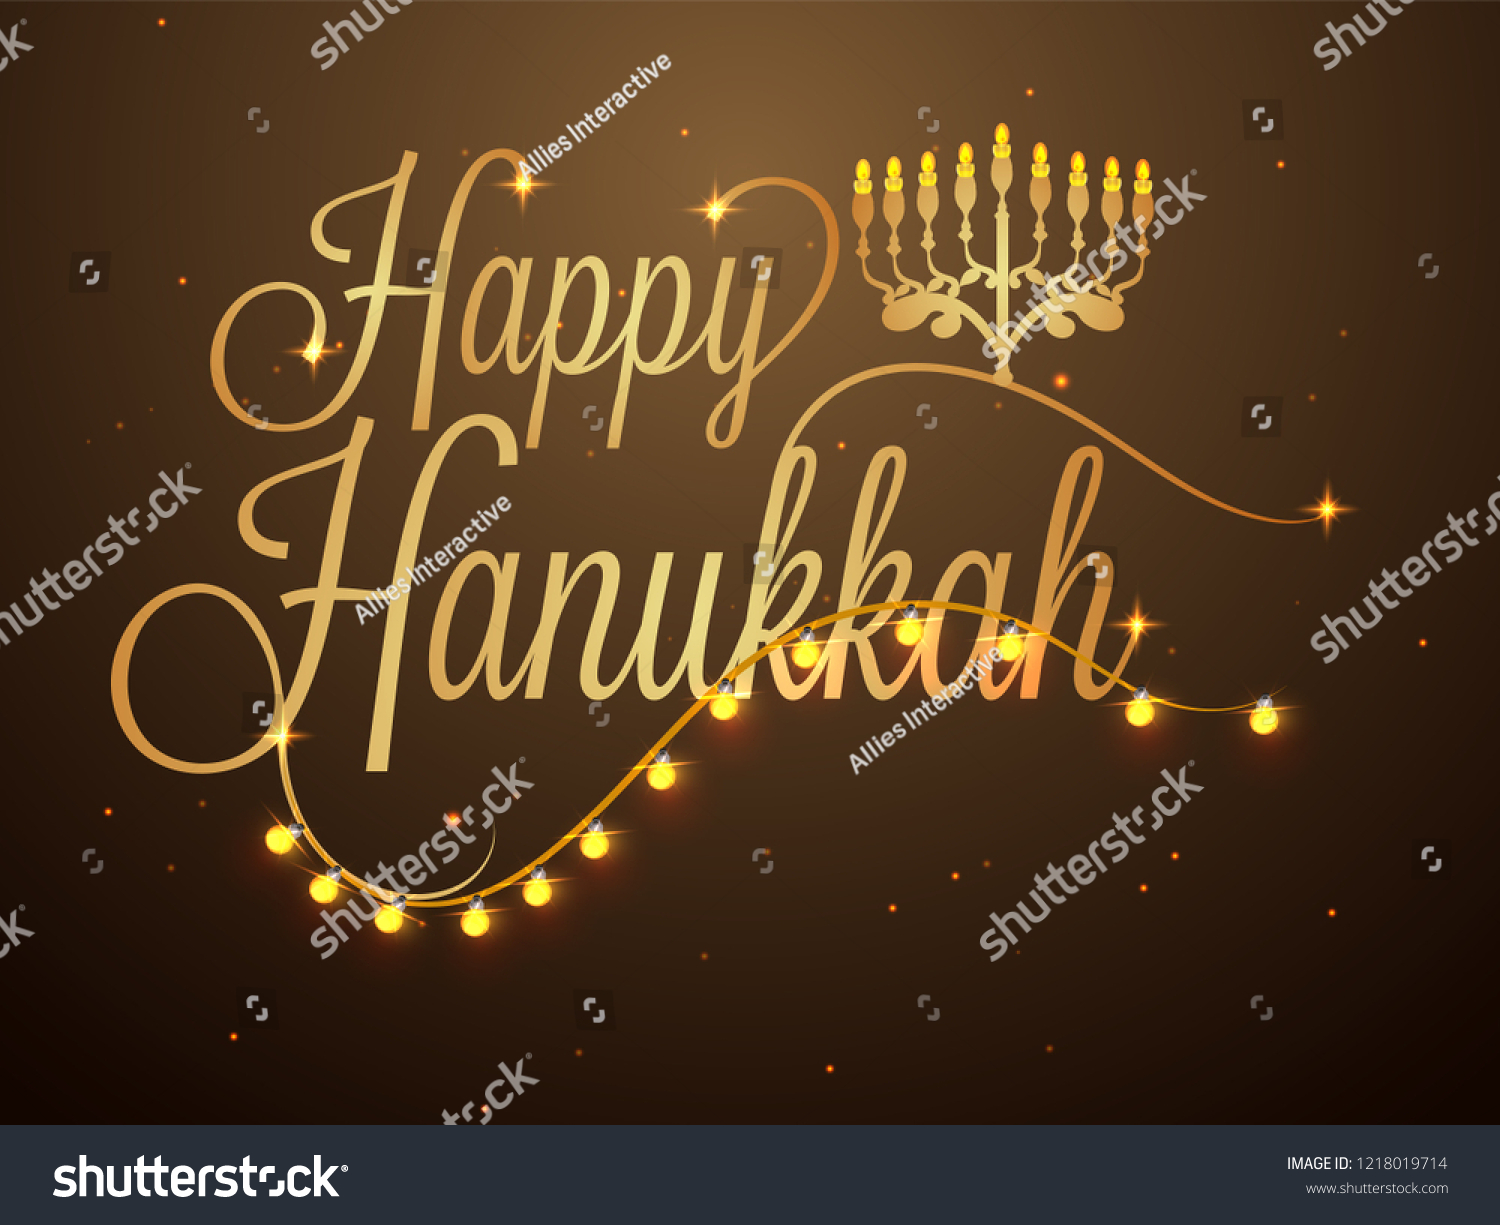 Happy Hanukkah lettering decorated with lighting garland on glossy brown background for Jewish Holiday celebration. #1218019714